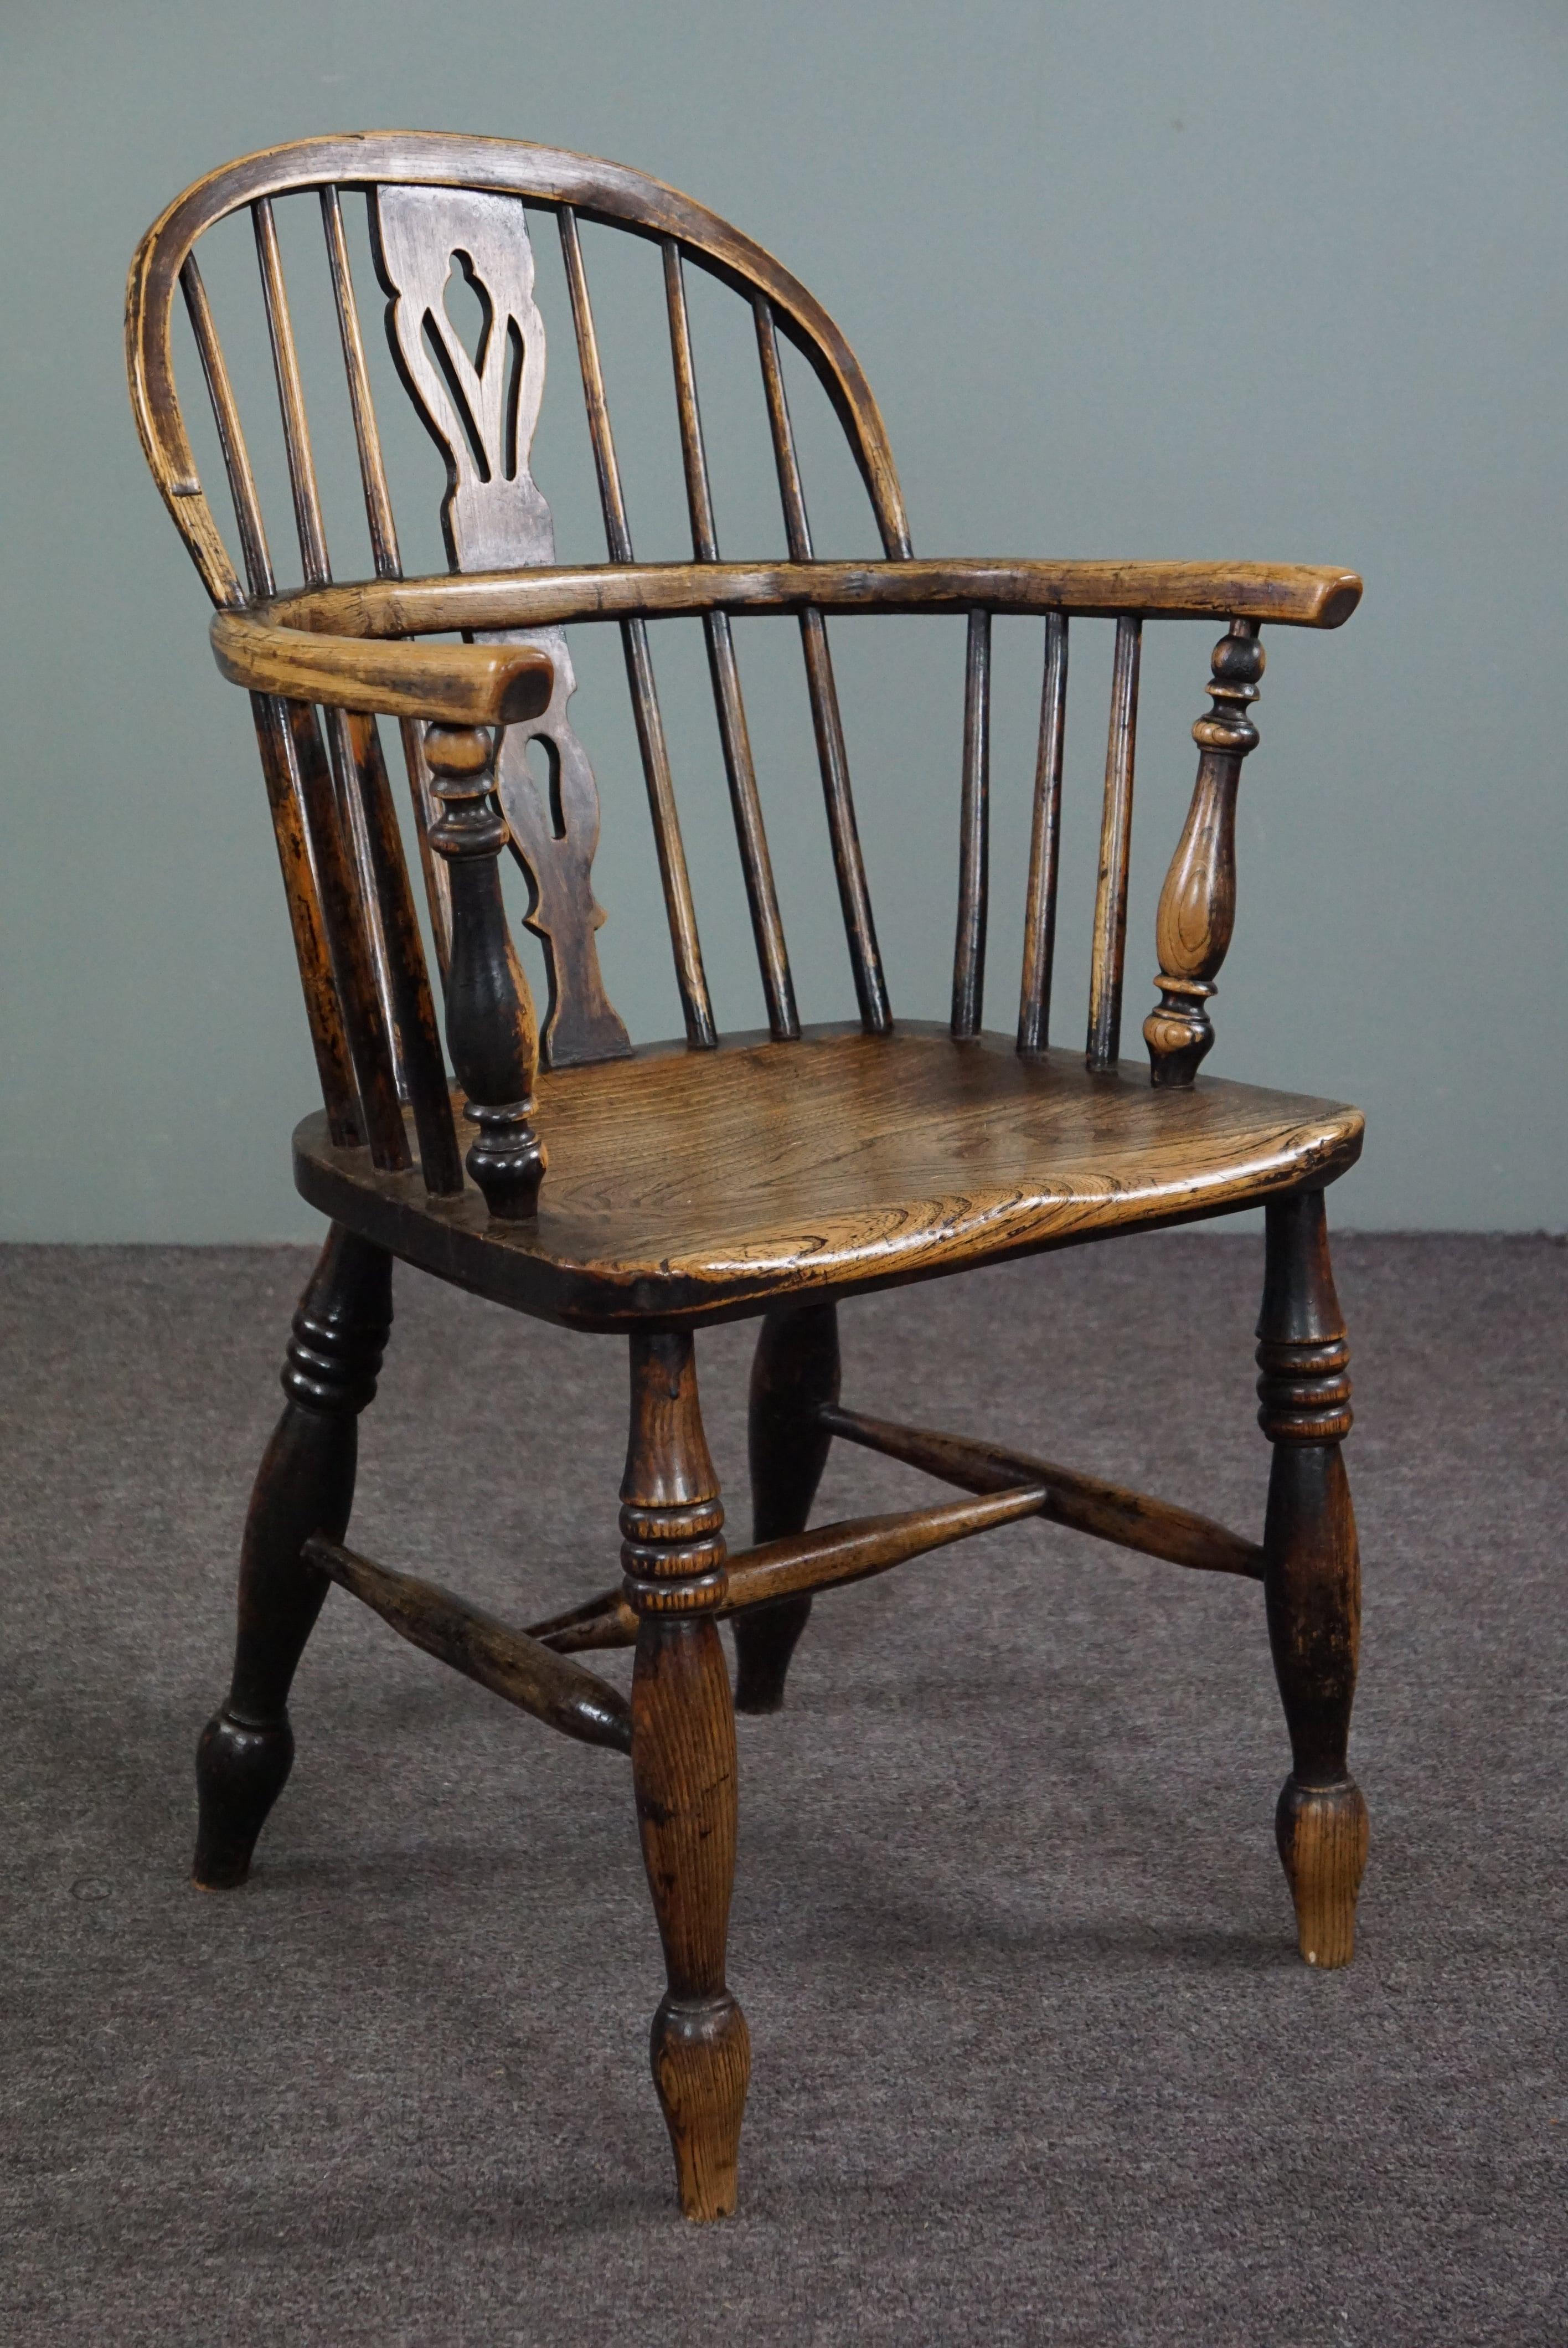 This beautiful antique chair is made of solid wood and has a beautiful patina.

This elegant antique English Windsor chair with a low backrest from the mid-18th century has a barred backrest and a beautifully shaped thick solid wood seat and